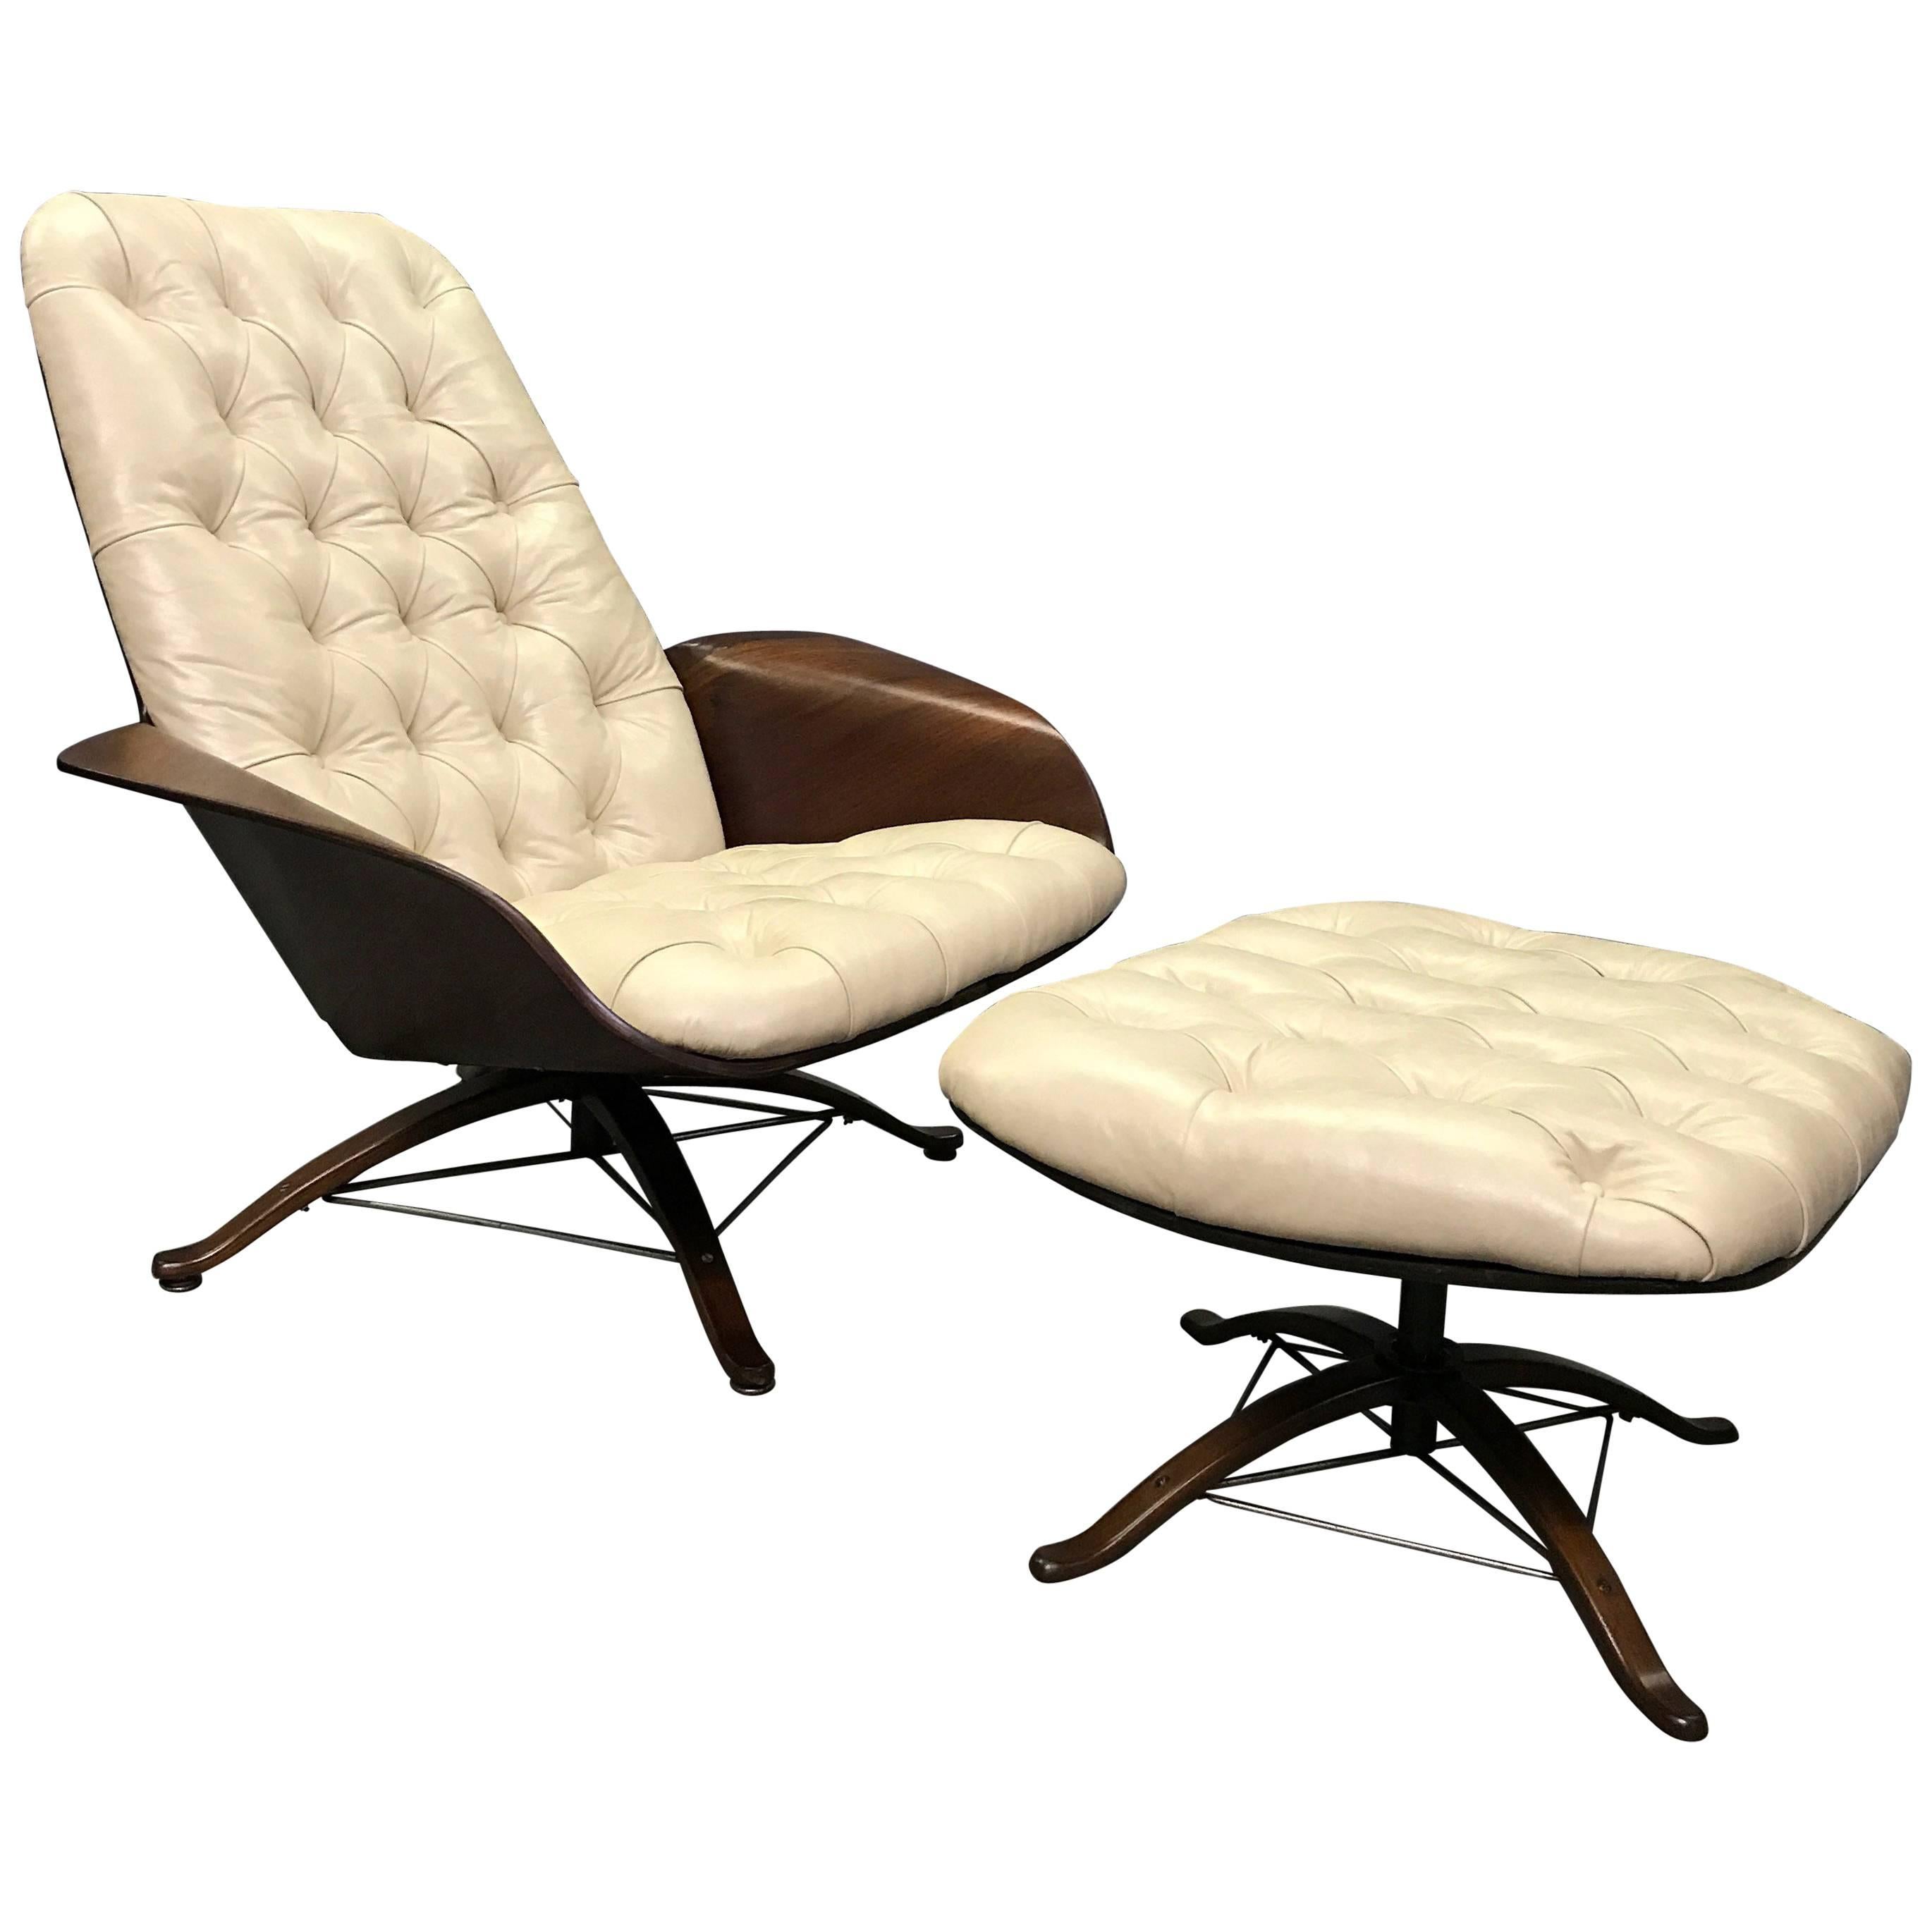 Mr. Chair Lounge Chair and Ottoman by George Mulhauser for Plycraft